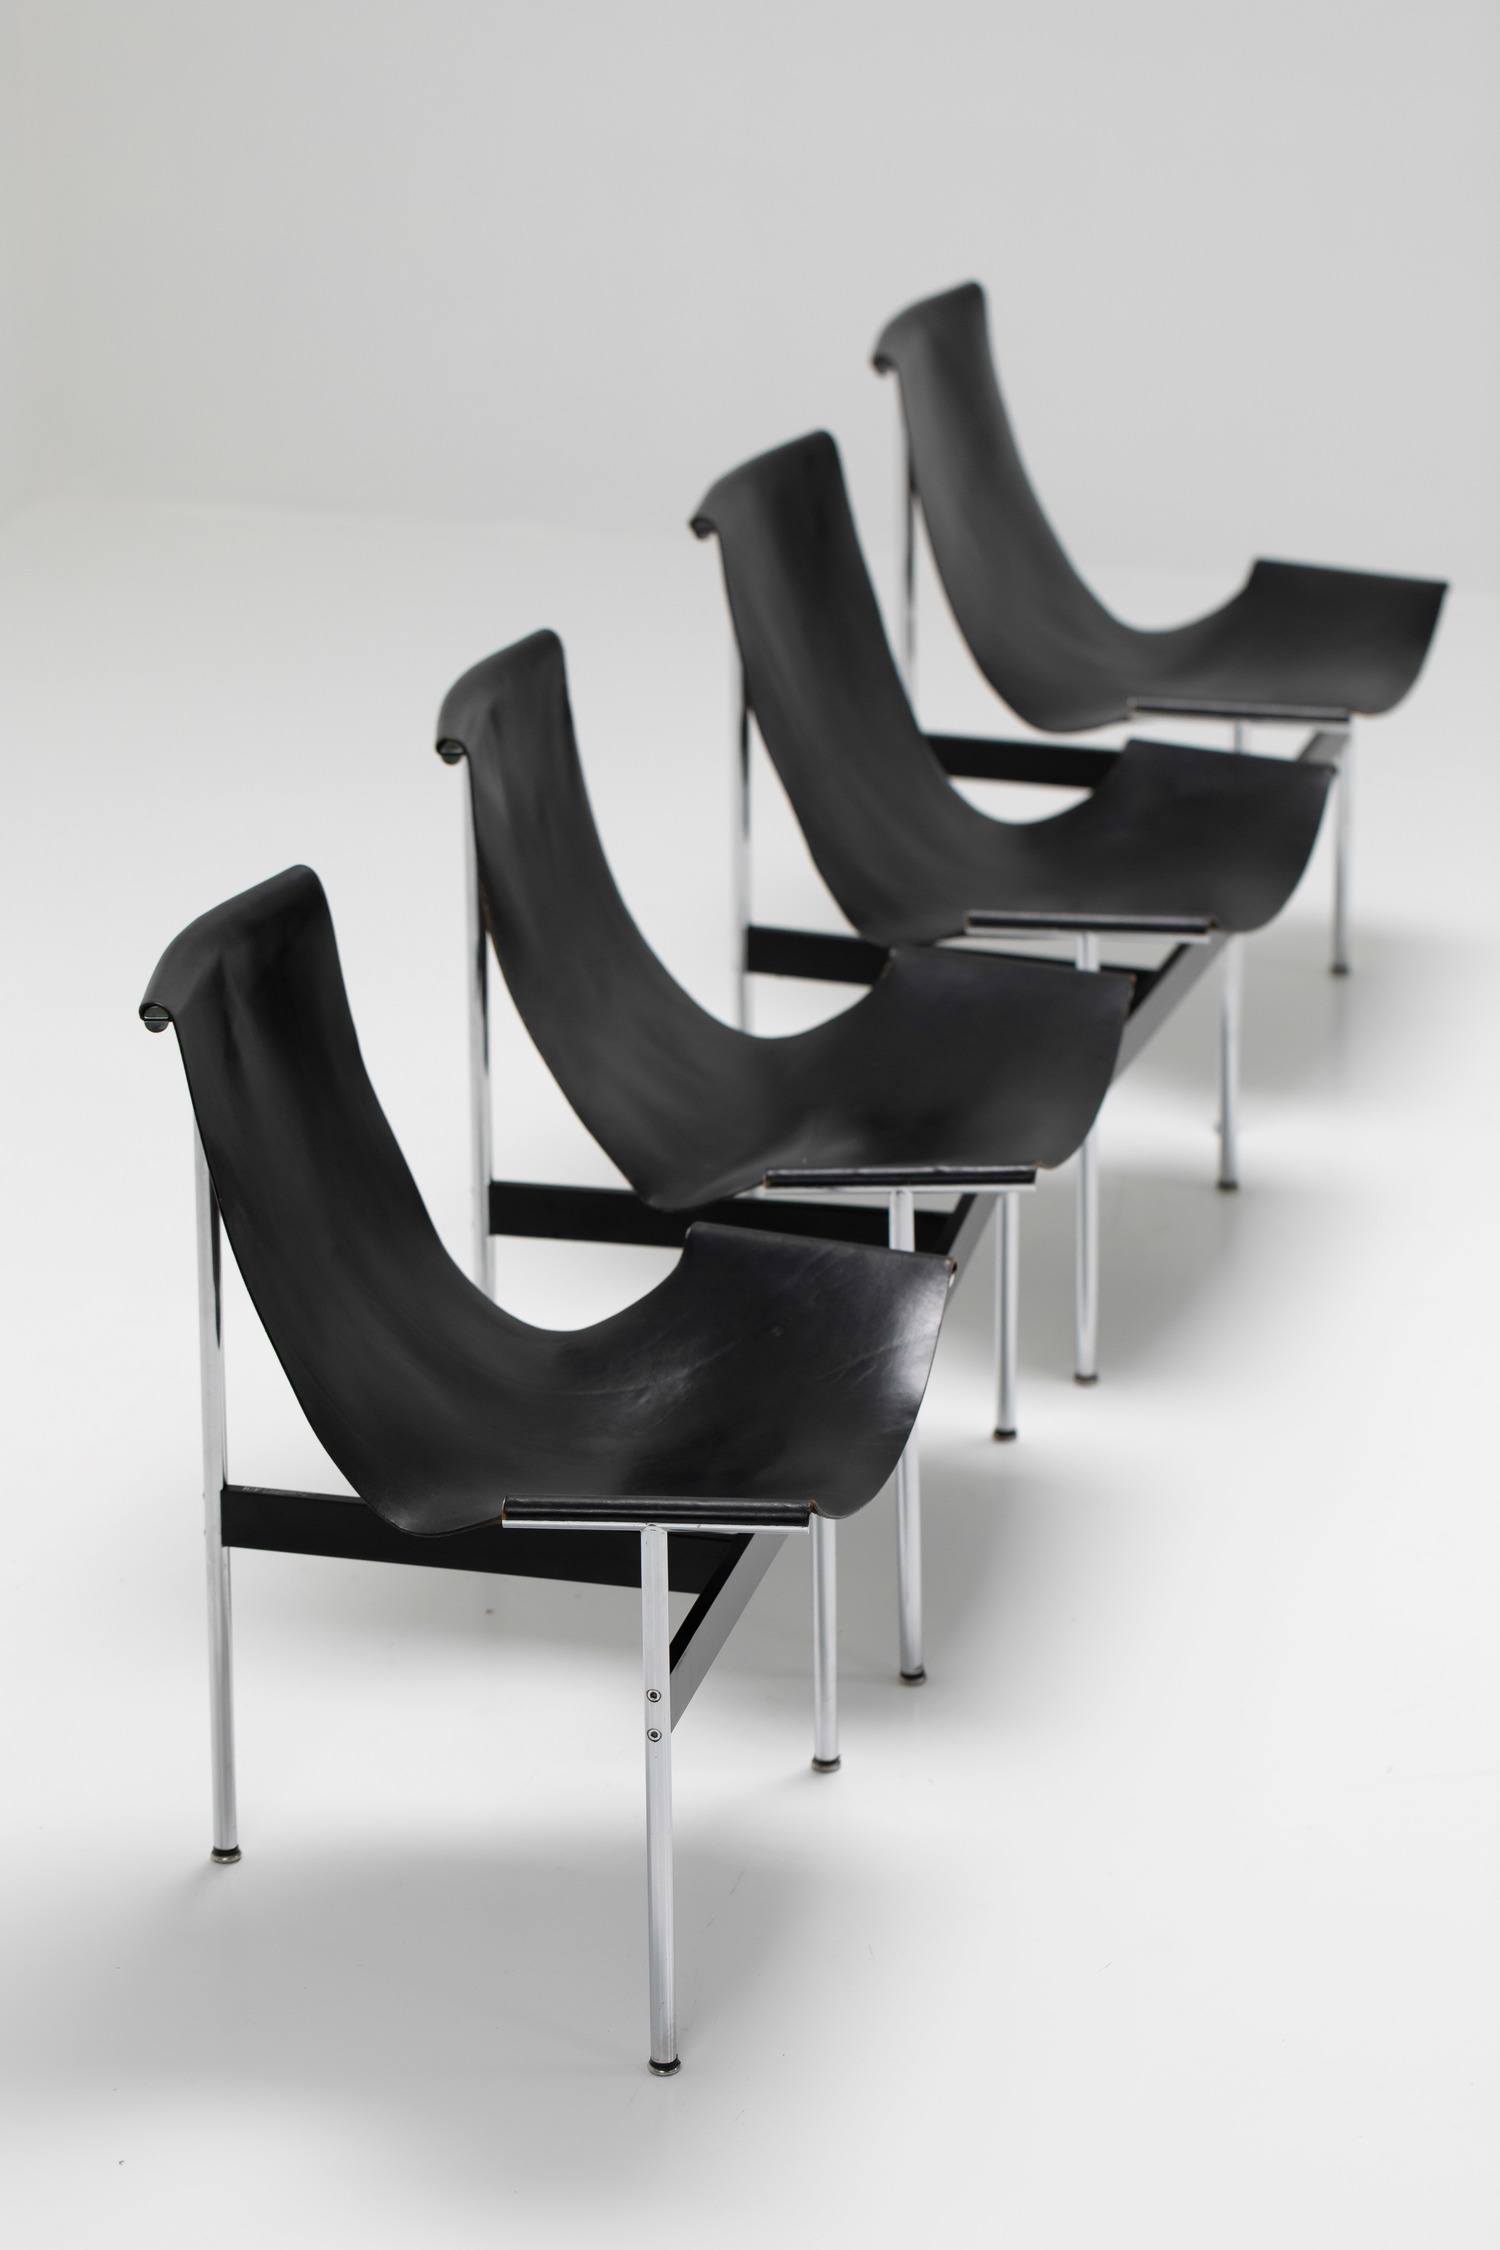 Set of 4 T-chairs by Katavolos and Laverne